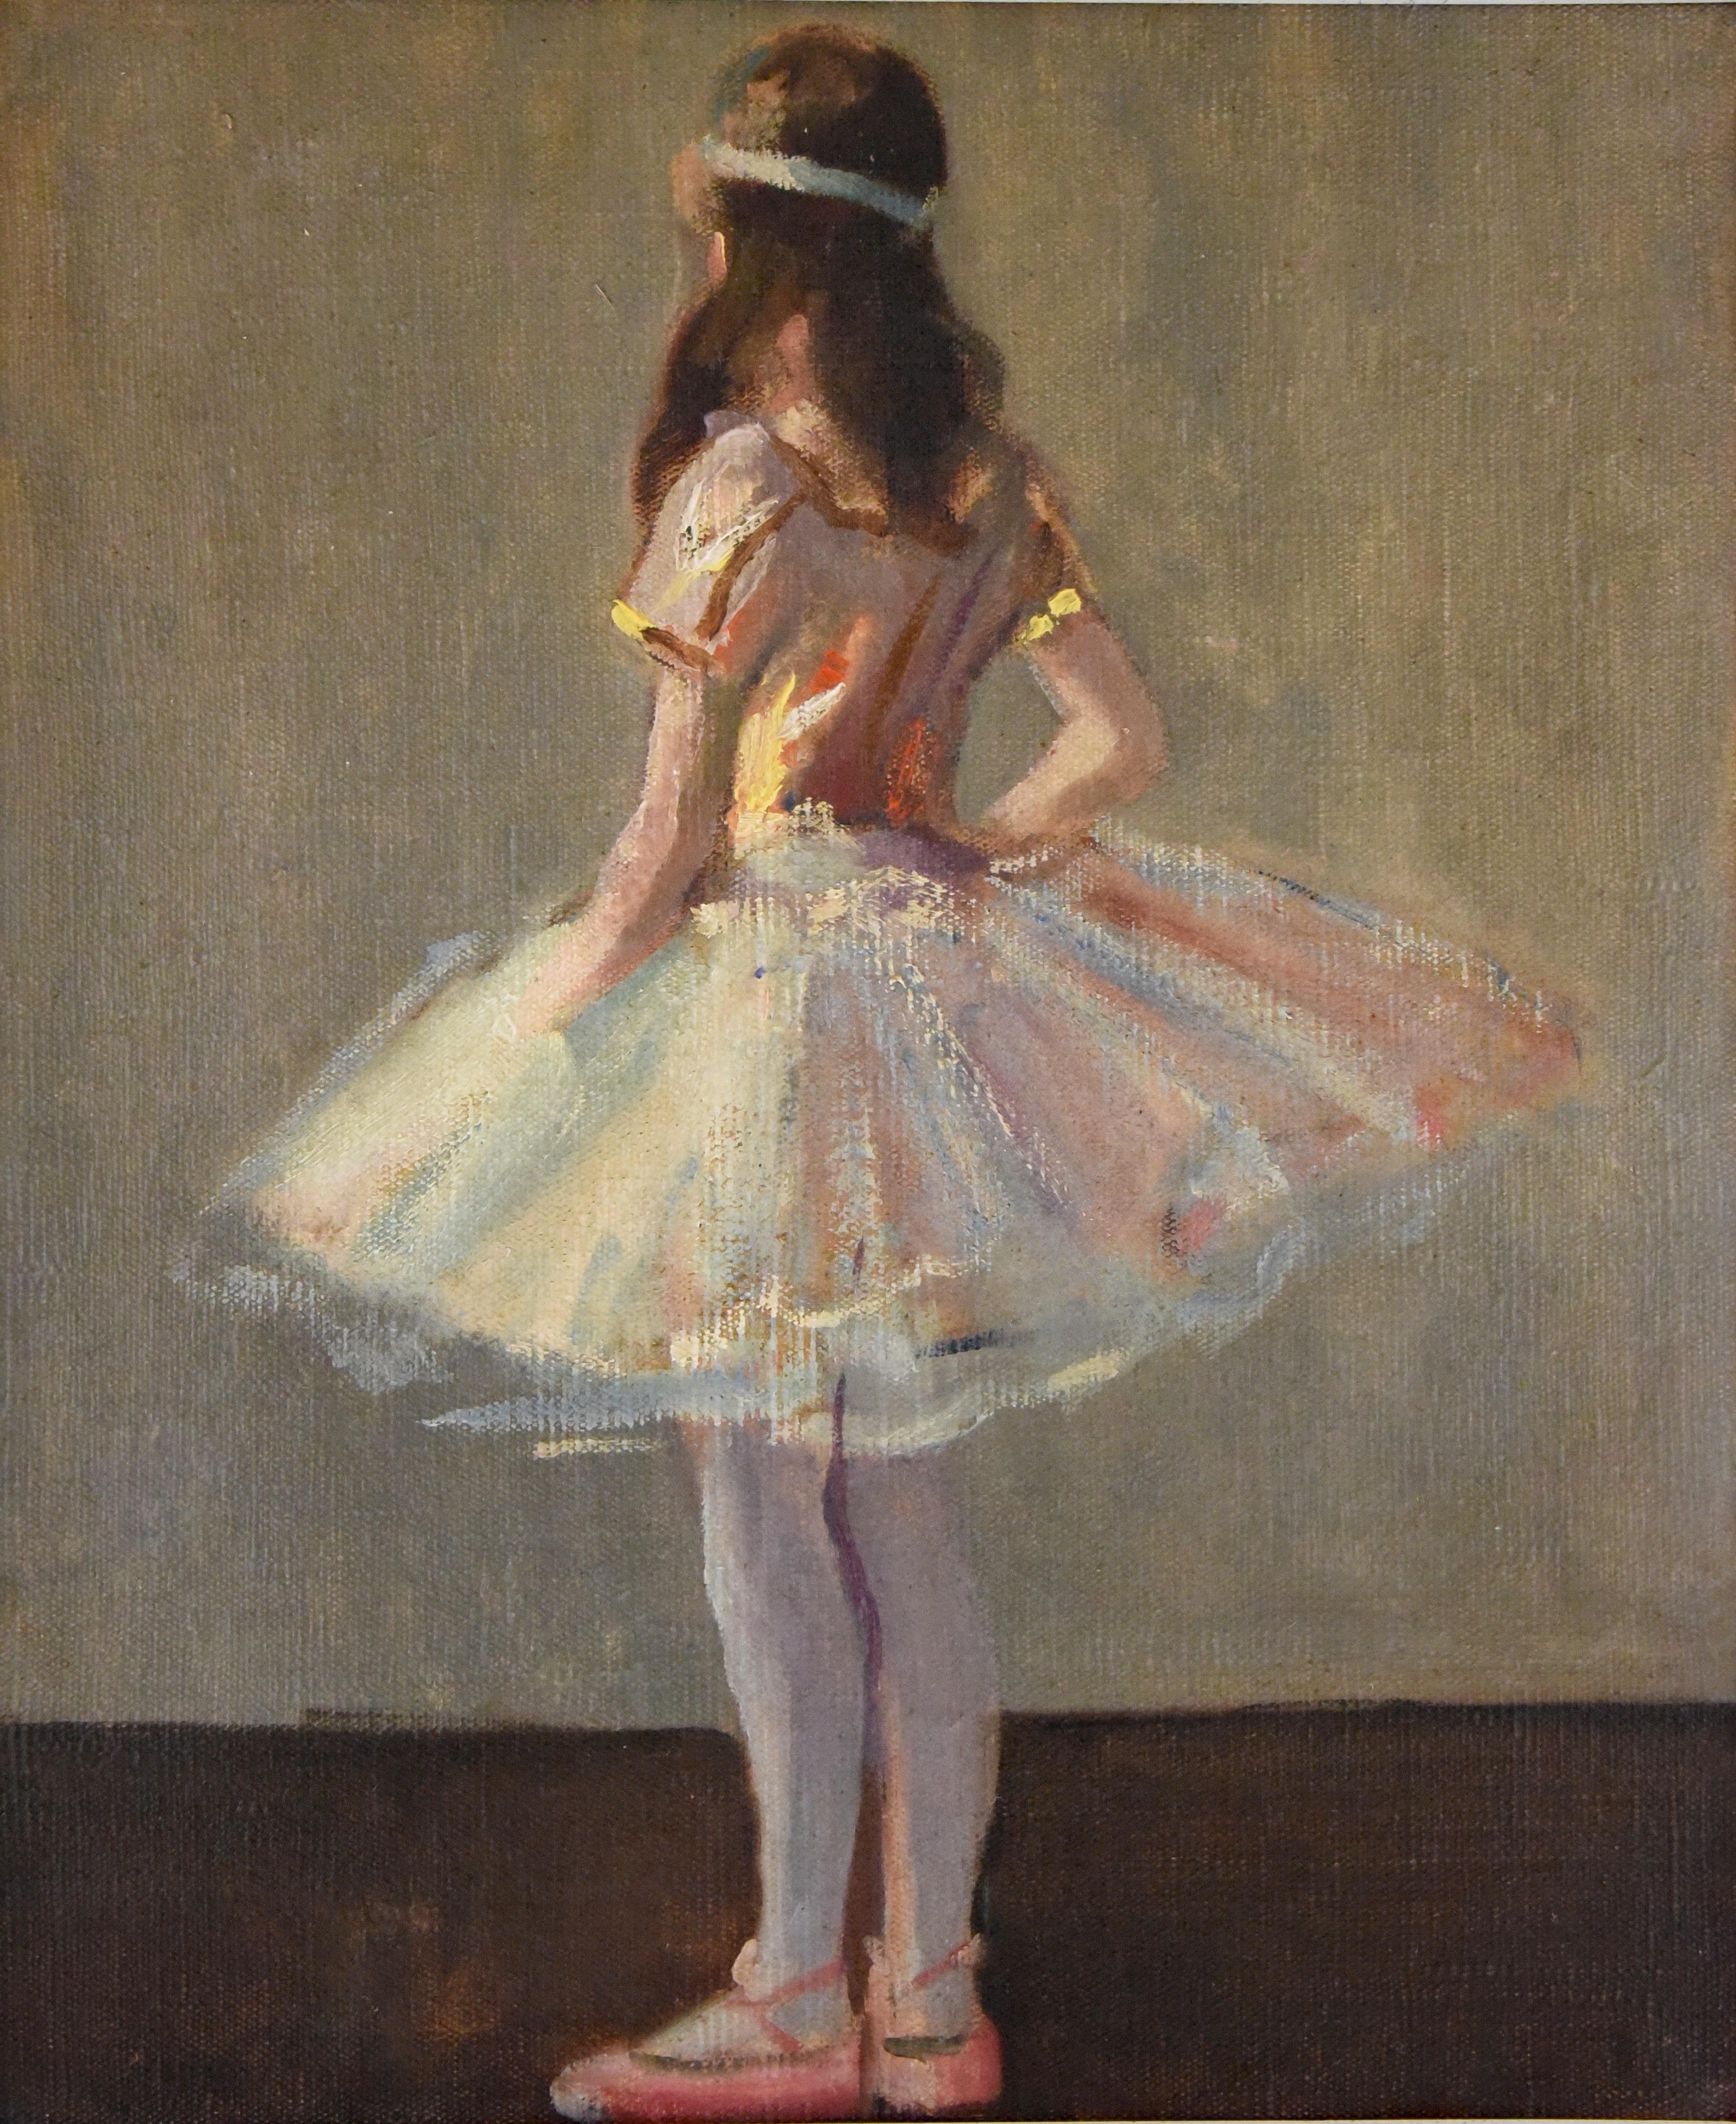 Art Deco painting of a ballerina girl. 
She is wearing a white and pink tutu.
France, circa 1930-1940. 

Size of the frame: 
H. 58 cm x L. 50.5 cm. 
H. 22.8 inch x L. 19.8 inch. 
Size of the work: 
H. 46 cm x L. 38.5 cm. 
H. 18 inch x L.